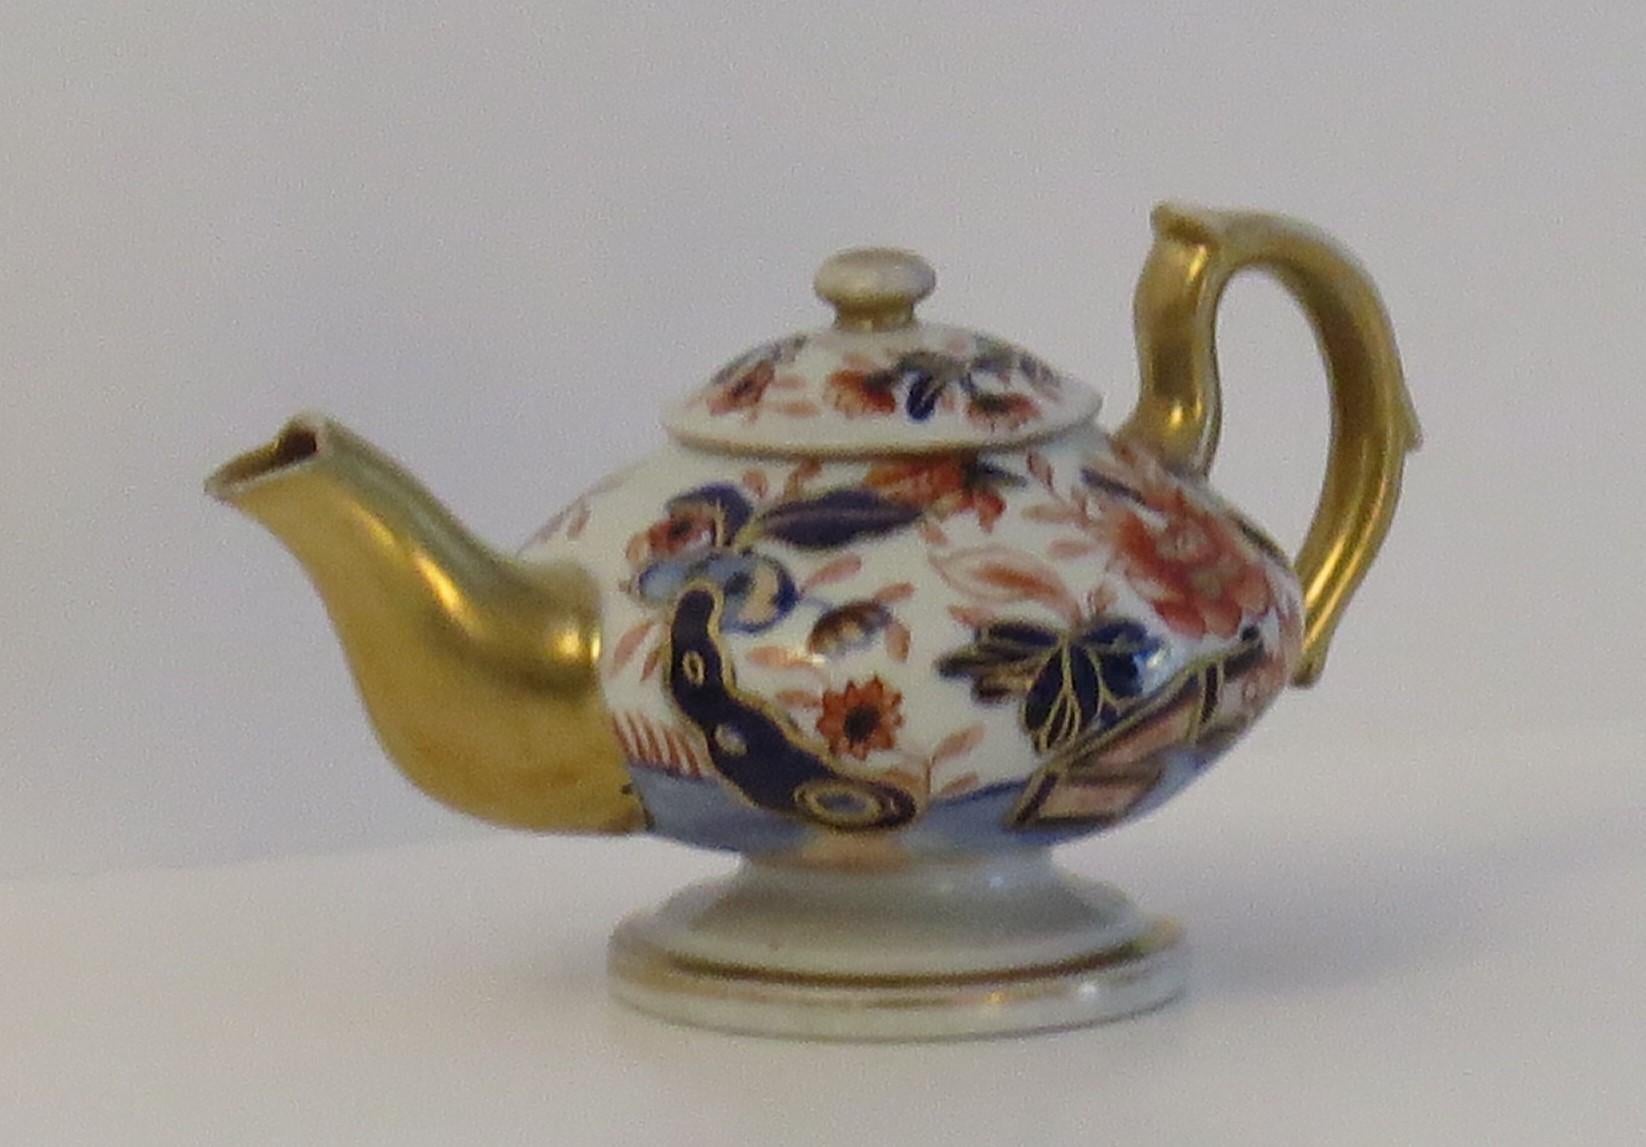 This is a rare Mason's ironstone miniature Teapot in the bold Fence Japan gilded pattern, which we date to circa 1820.

Miniature or toy items of Masons ironstone are hard to find today.

This piece is well potted as a Teapot with a high loop